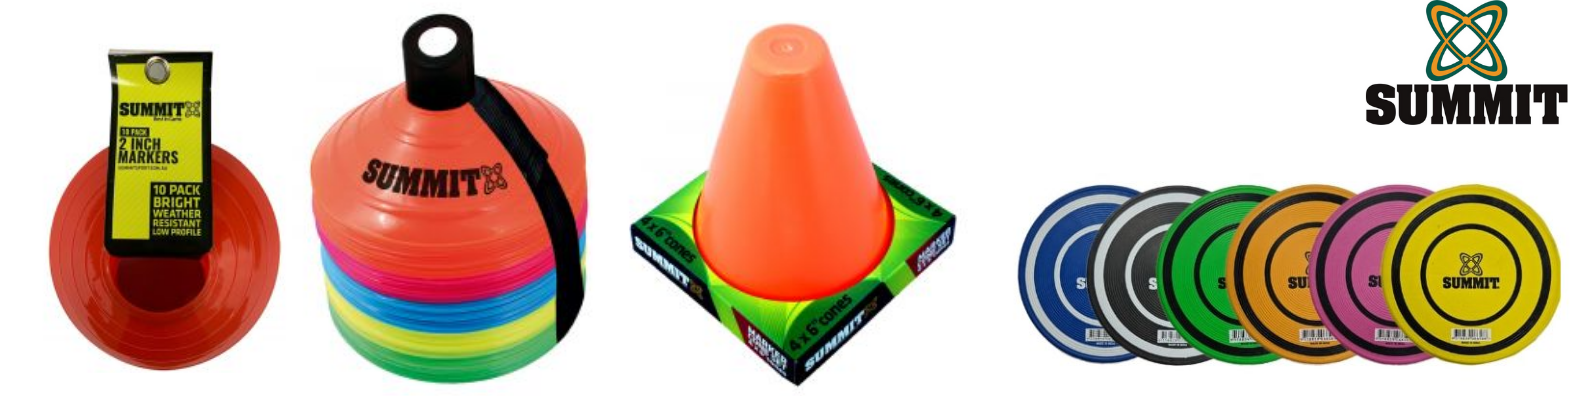 Cones And Tees